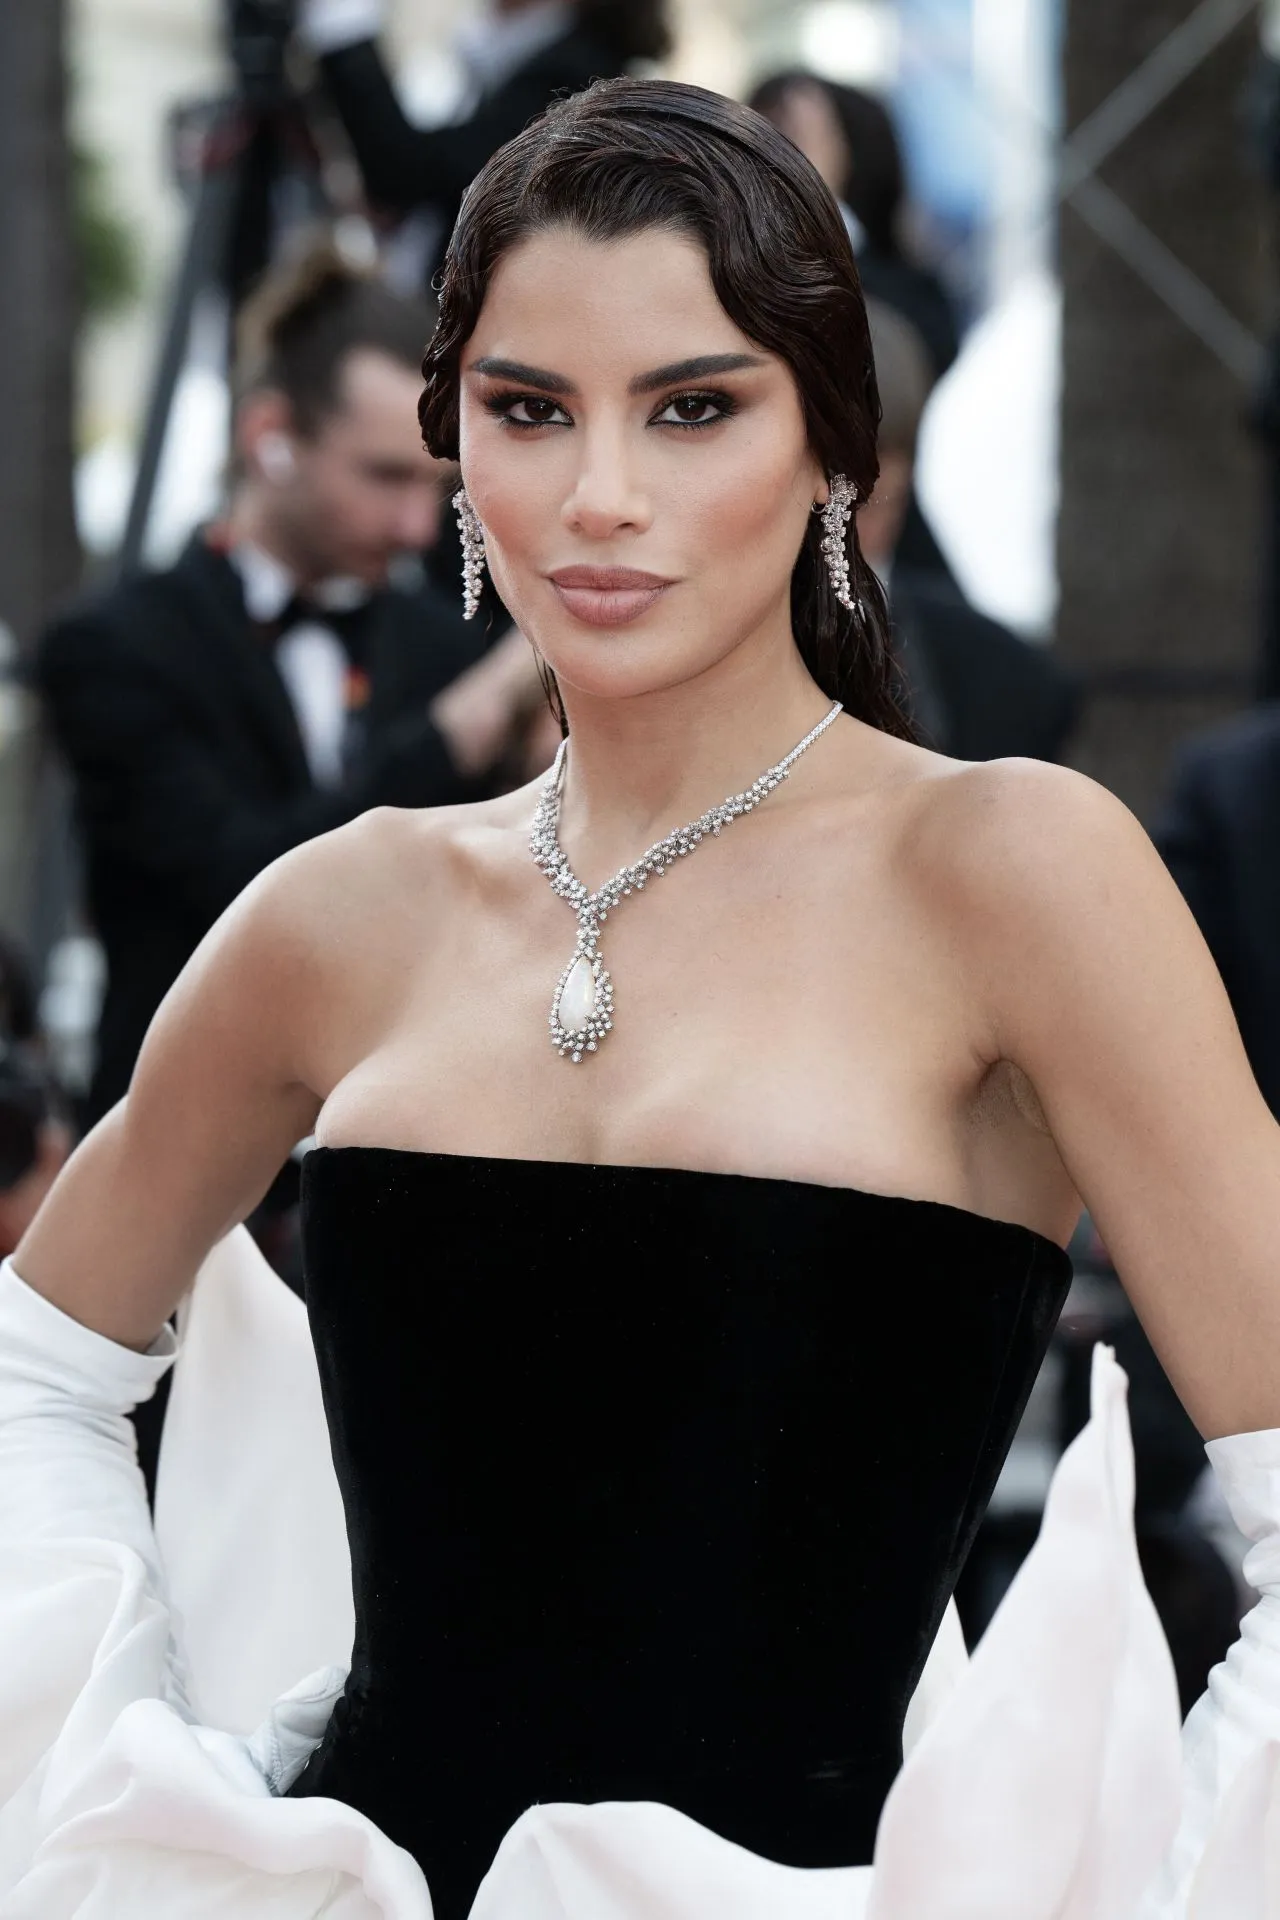 ARIADNA GUTIERREZ AT THE MOST PRECIOUS OF CARGOES PREMIERE AT CANNES FILM FESTIVAL